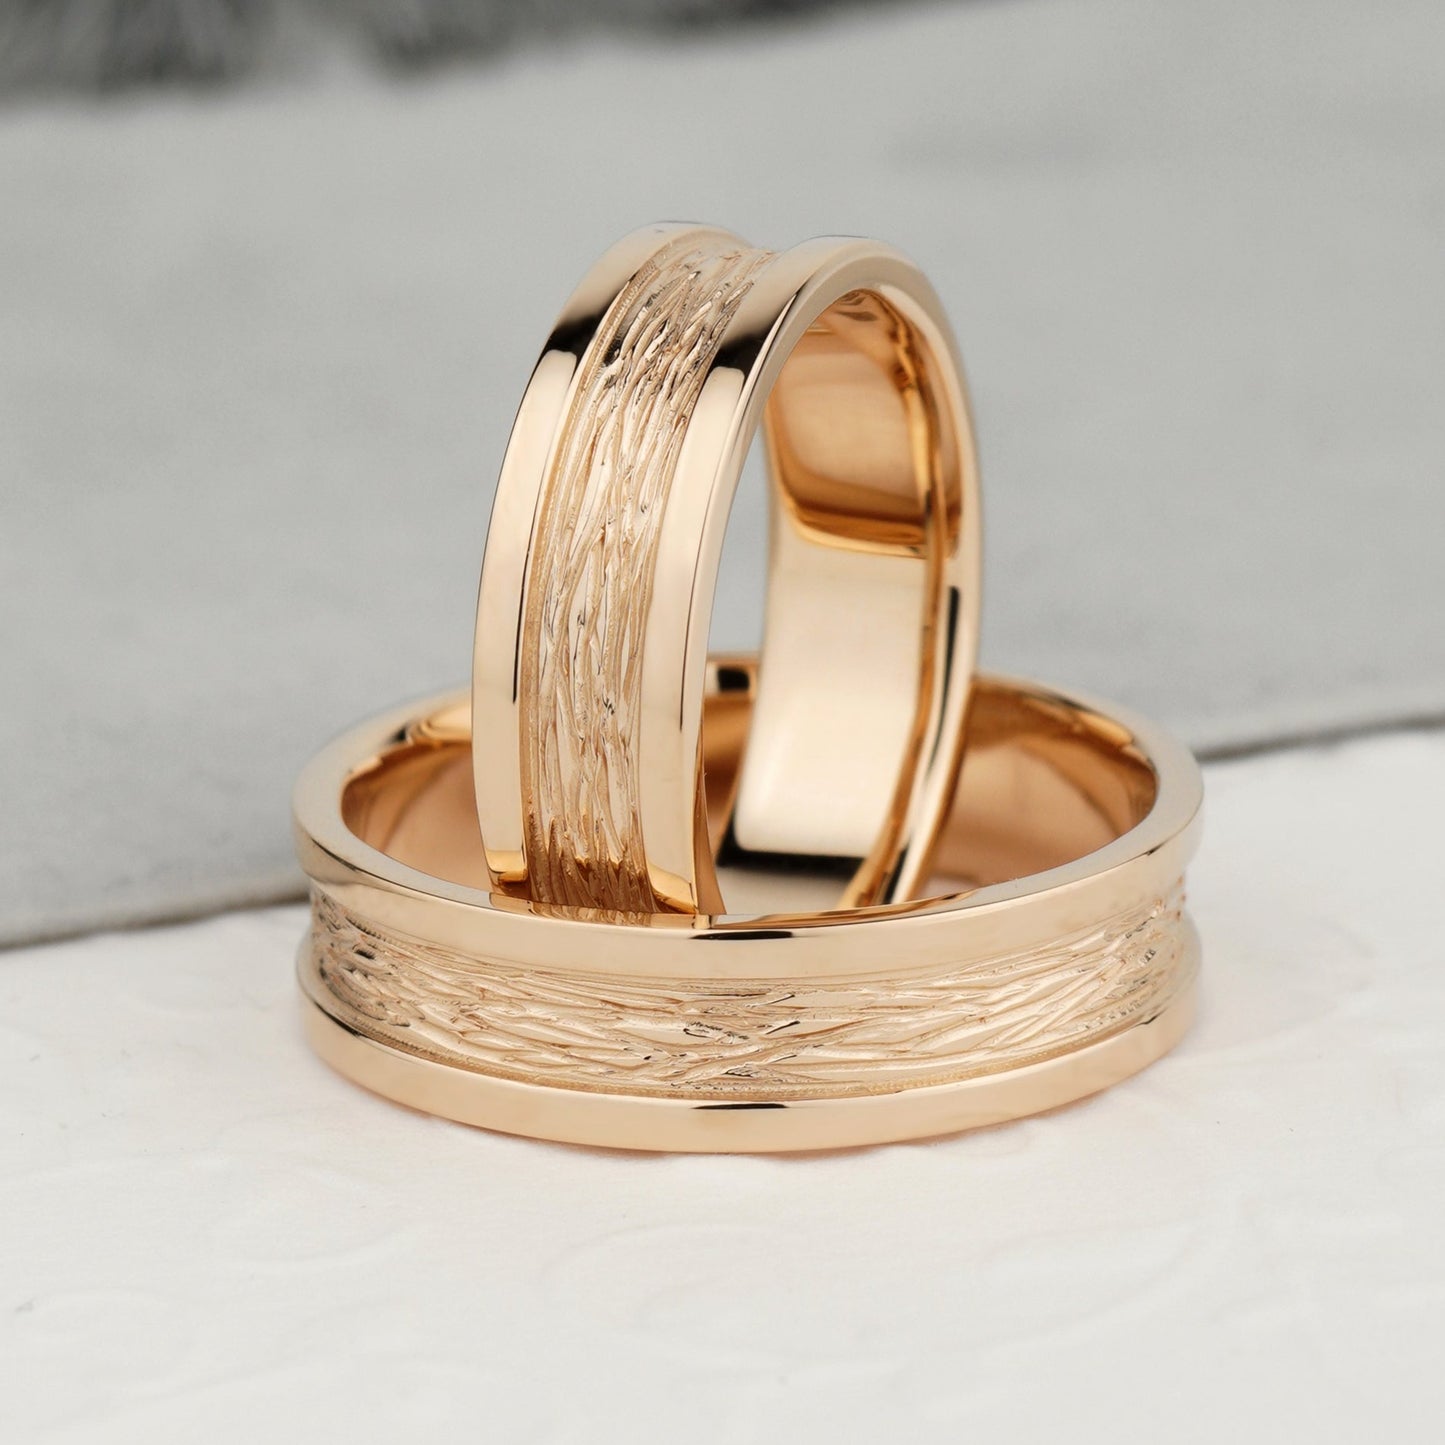 Matching wedding bands. Wedding bands set his and hers. Textured wedding bands. Wedding rings 14k. Unique wedding rings. Rings for couples. Gold wedding band set his and hers. Handmade wedding bands